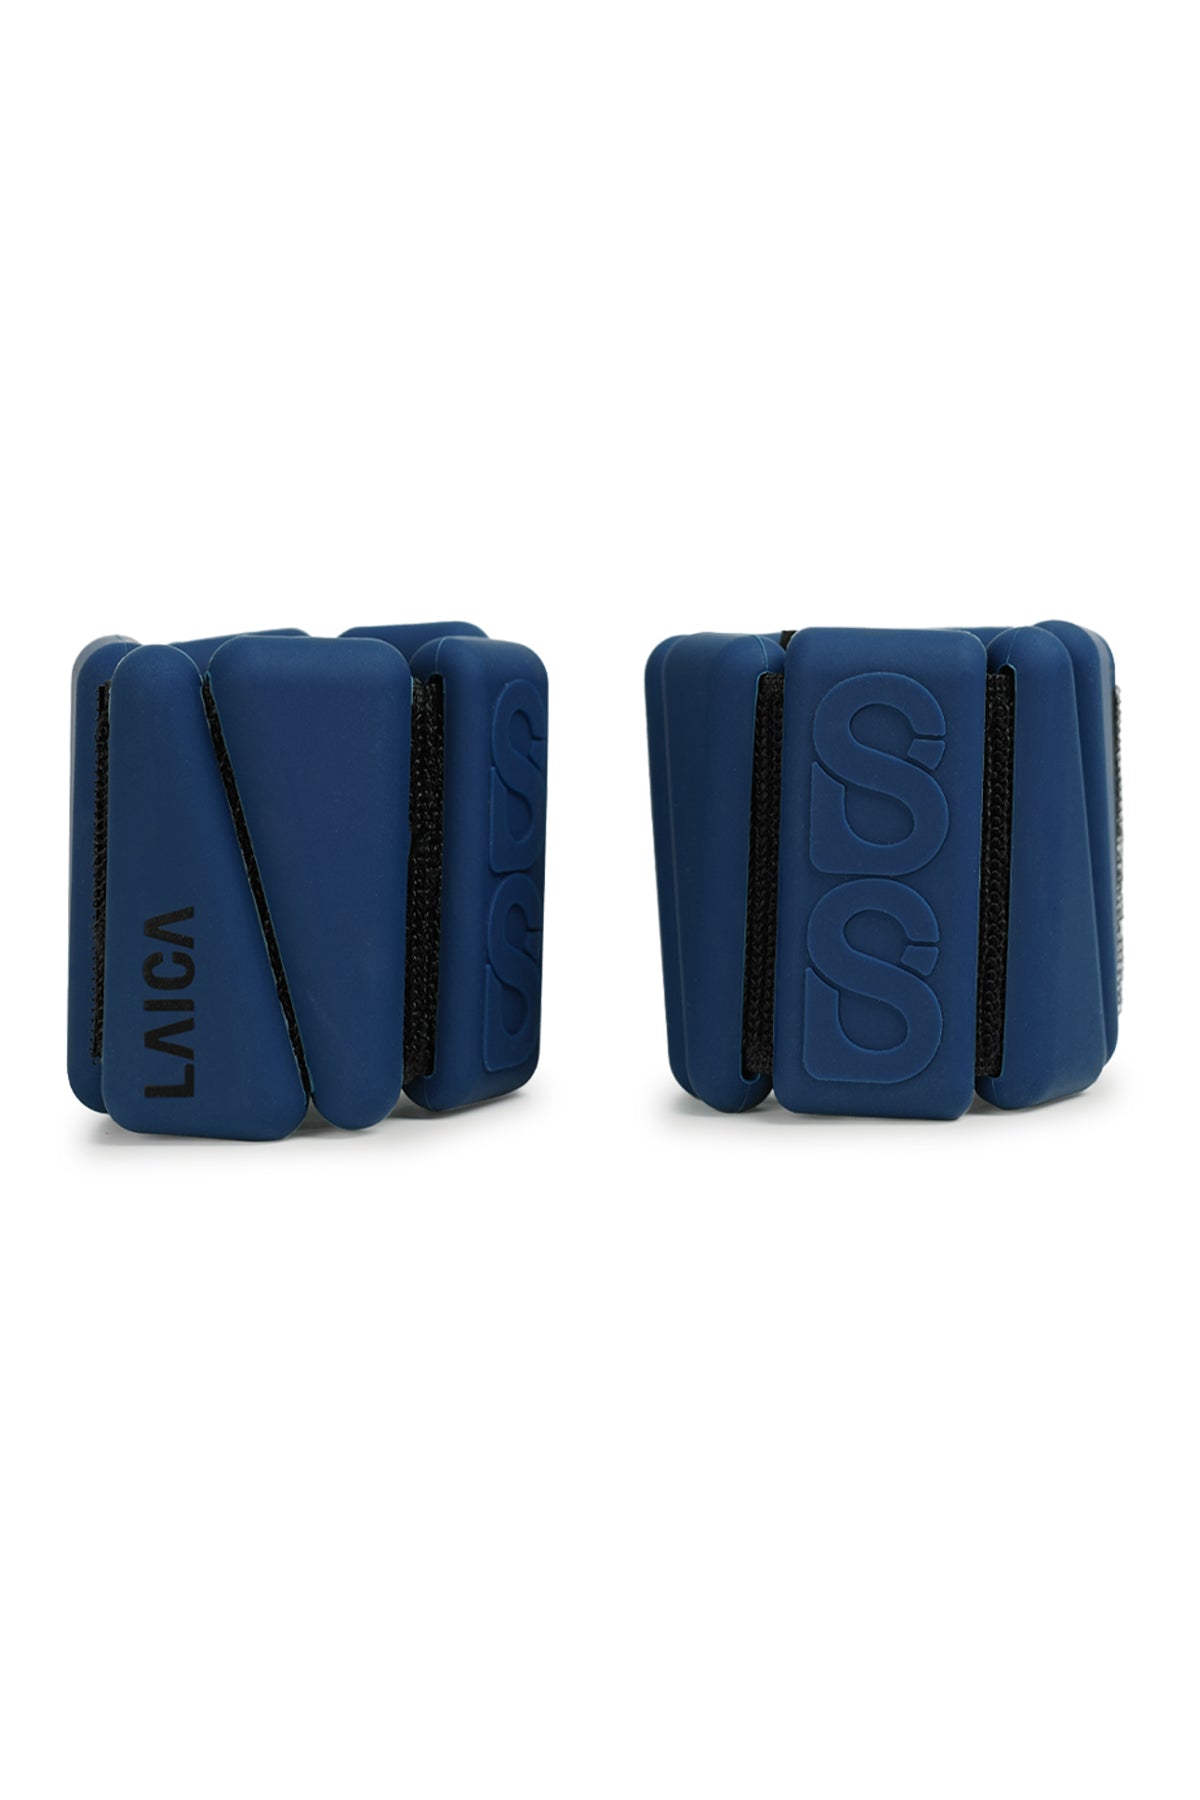 Athleisure Weighted Bangles - Navy